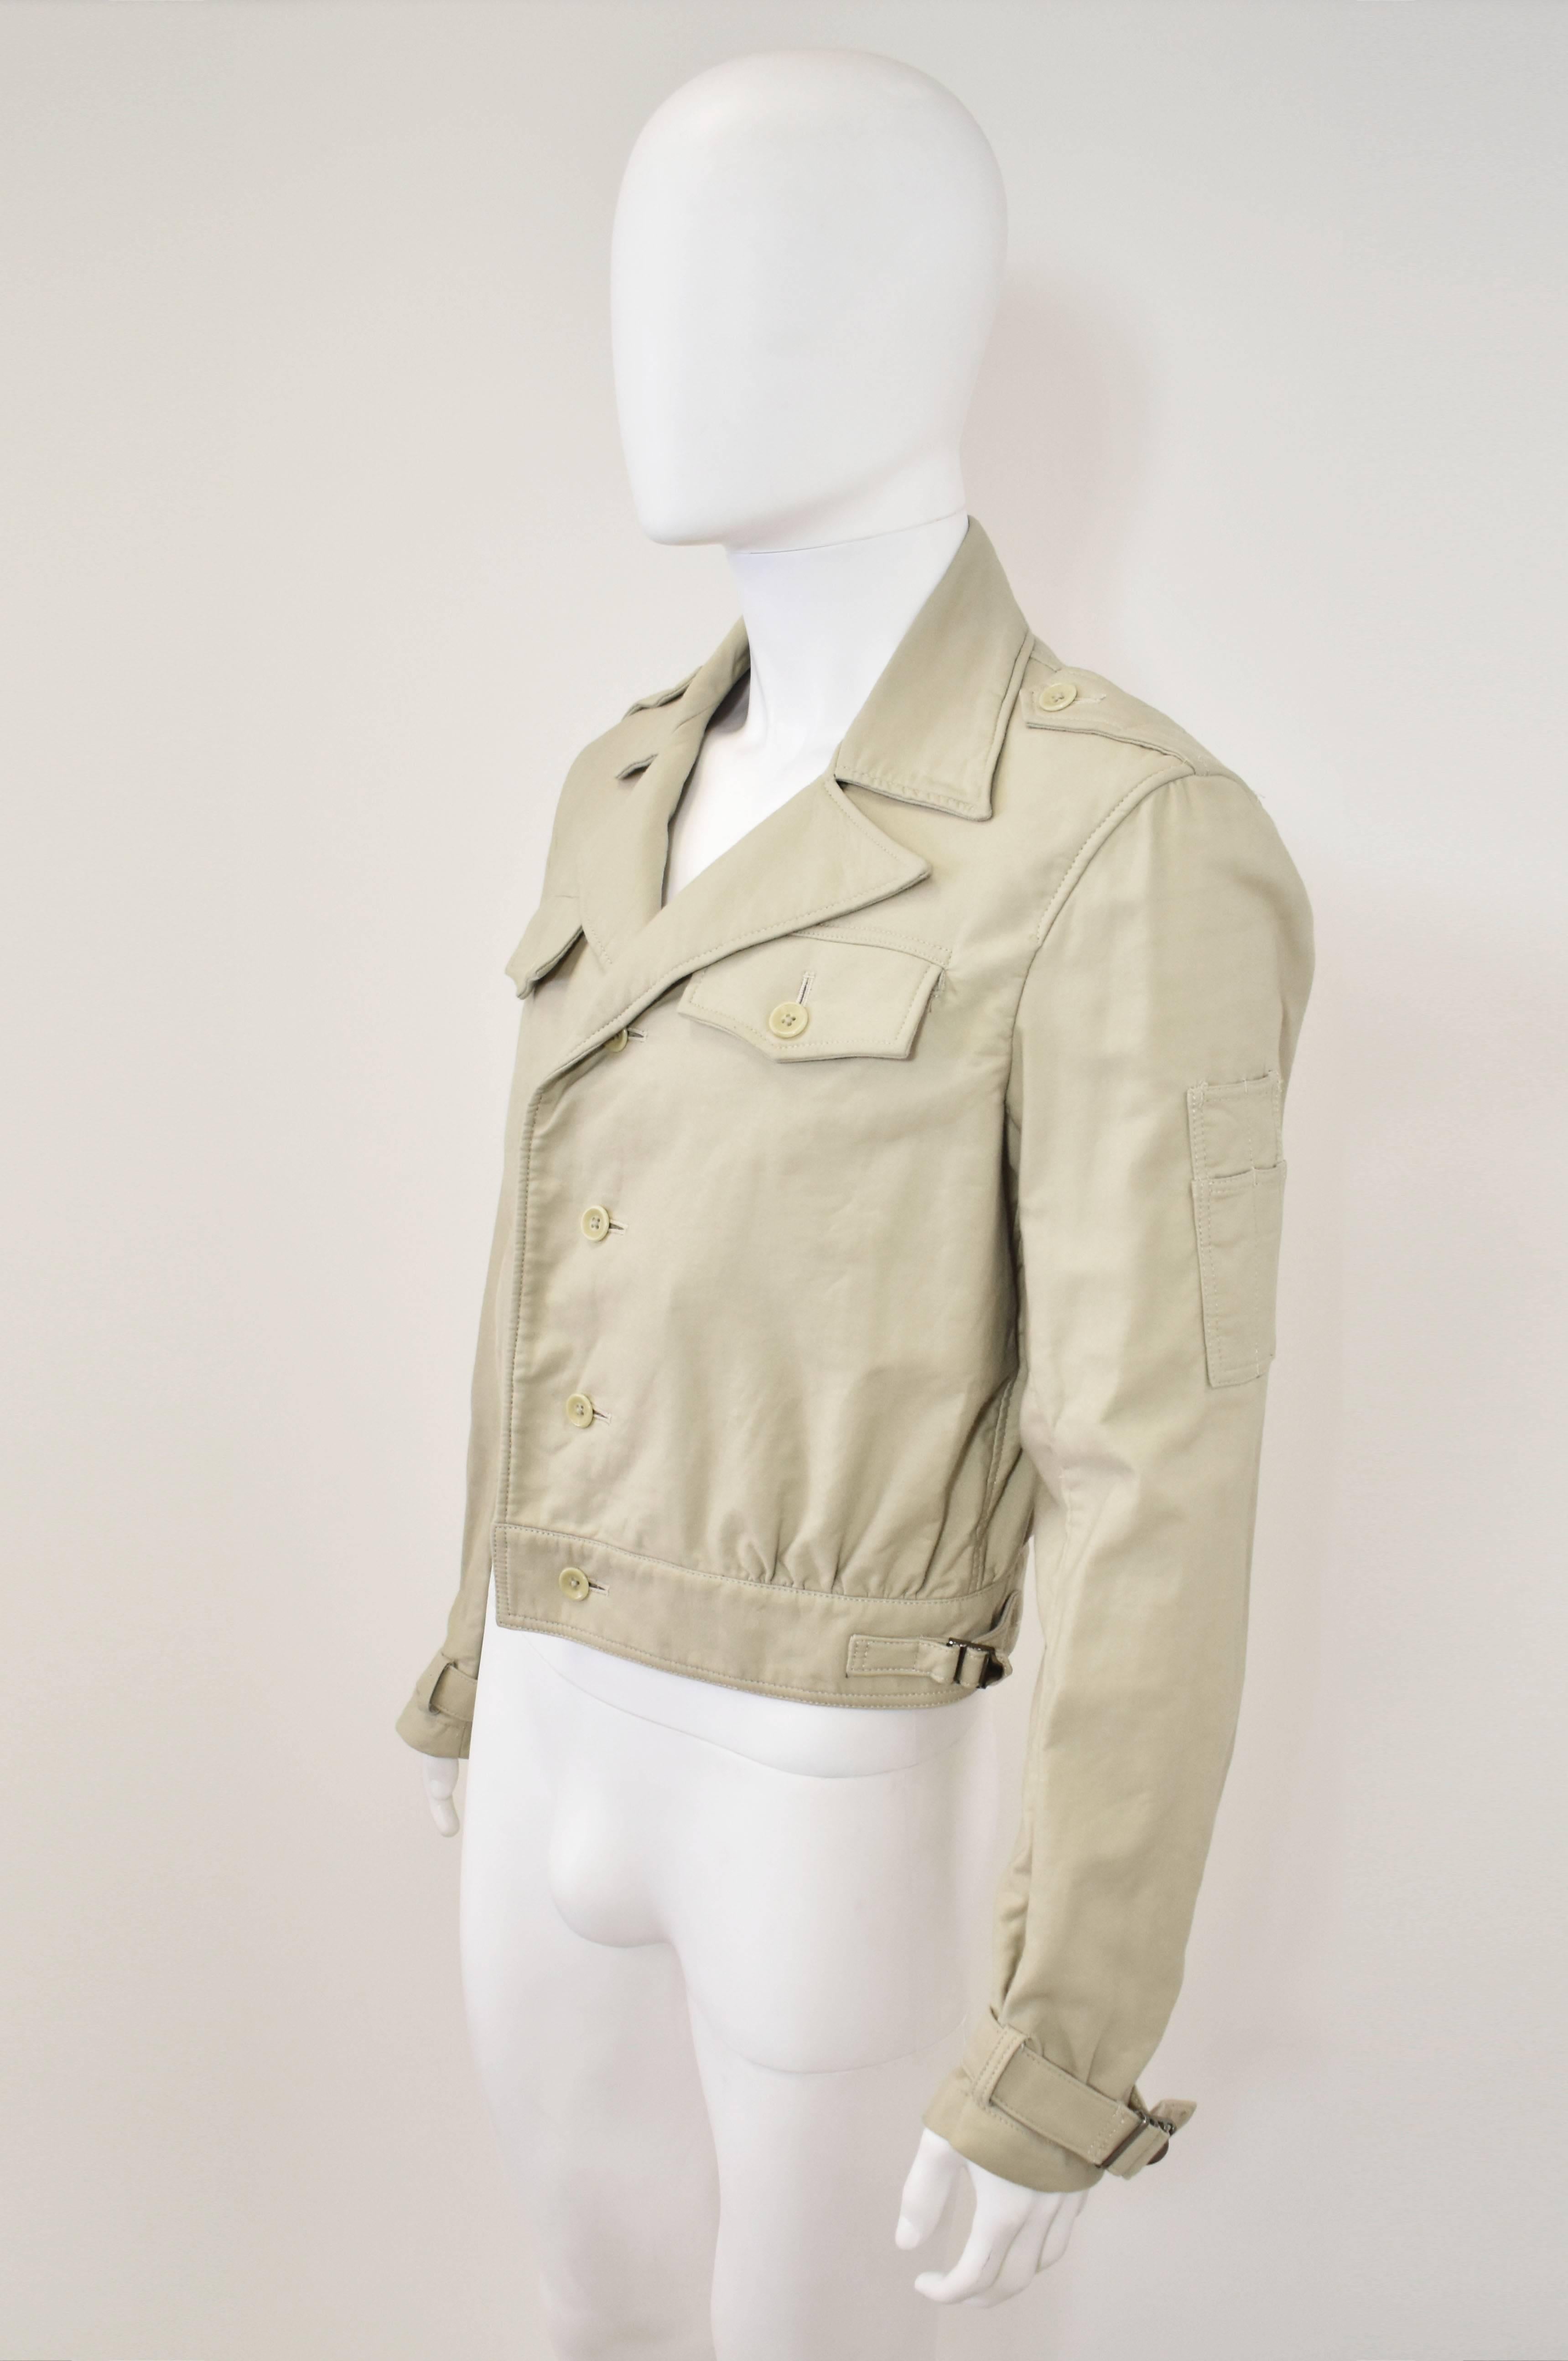 A rare 1980’s Y’s by Yohji Yamamoto beige jacket. It is a cross between a blouson and safari style jacket with a button-down front, cropped body, waistband with buckle details and collar. It has epaulettes on the shoulders and buckles on the